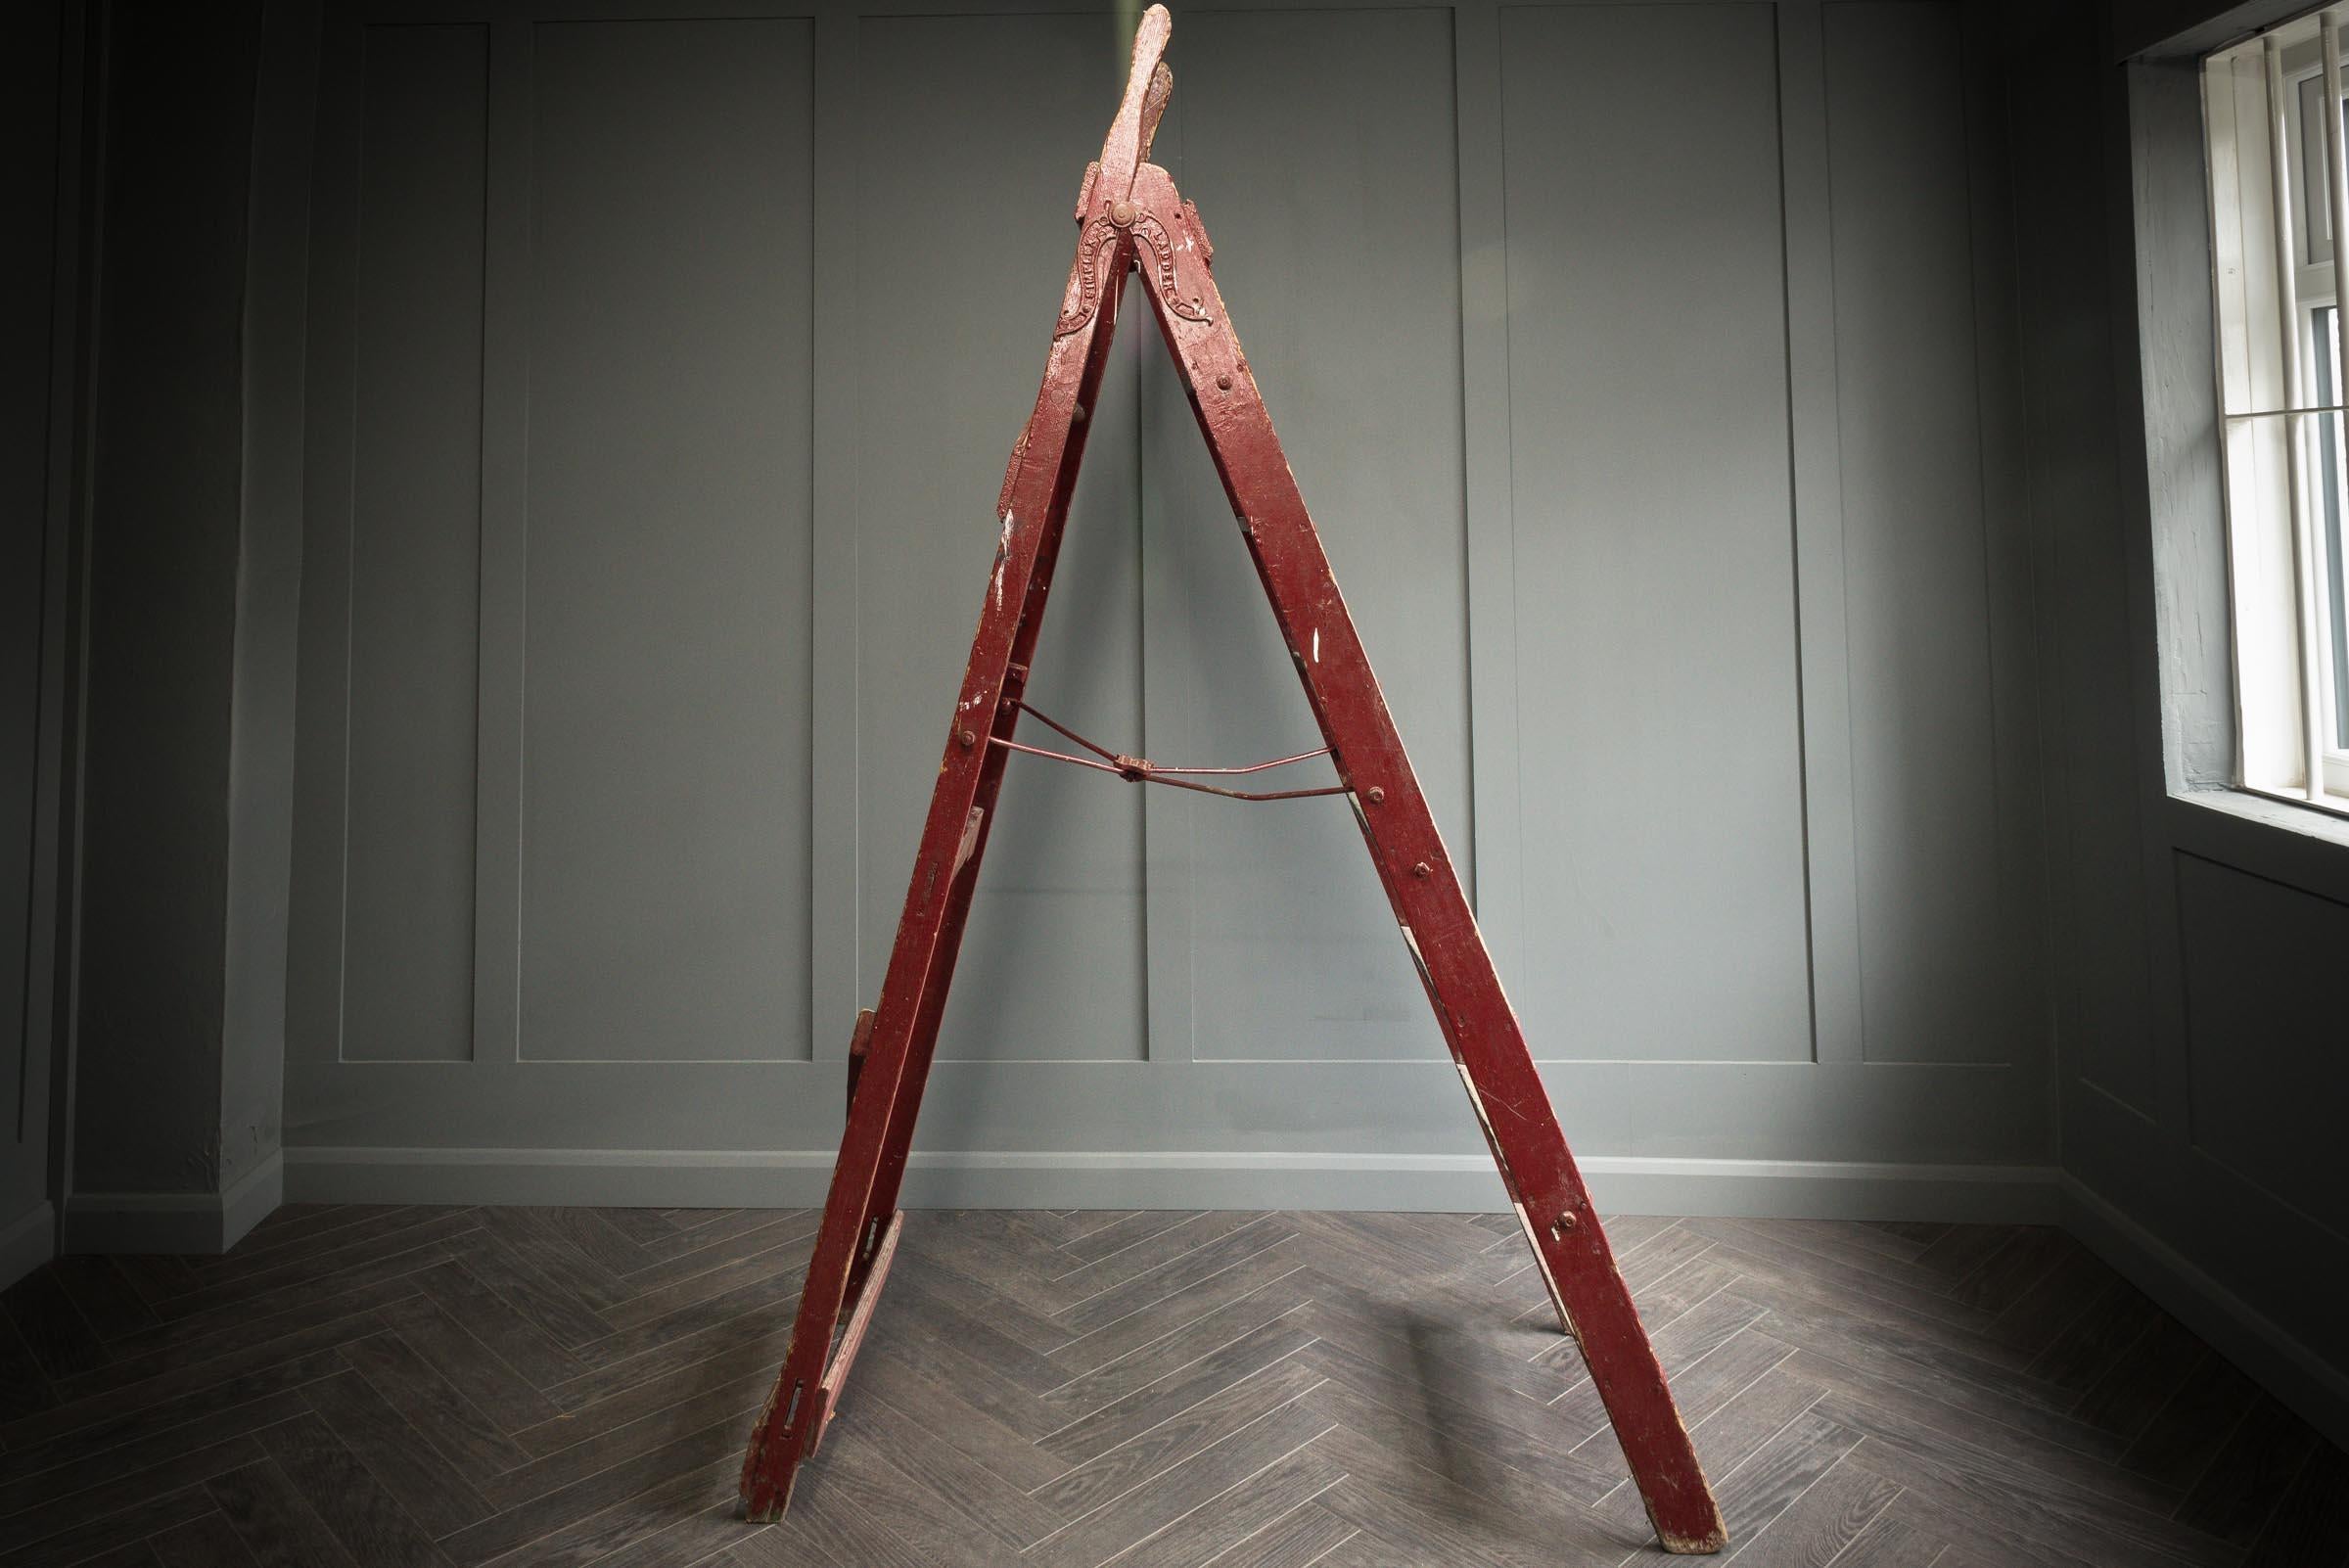 An original large simplex wooden step ladder in a bold red wash, consists of seven steps. The ladder closes by two metal hinges either side of the ladder. The ladder has original paint marks consistent with age and use. This ladder is typical of the